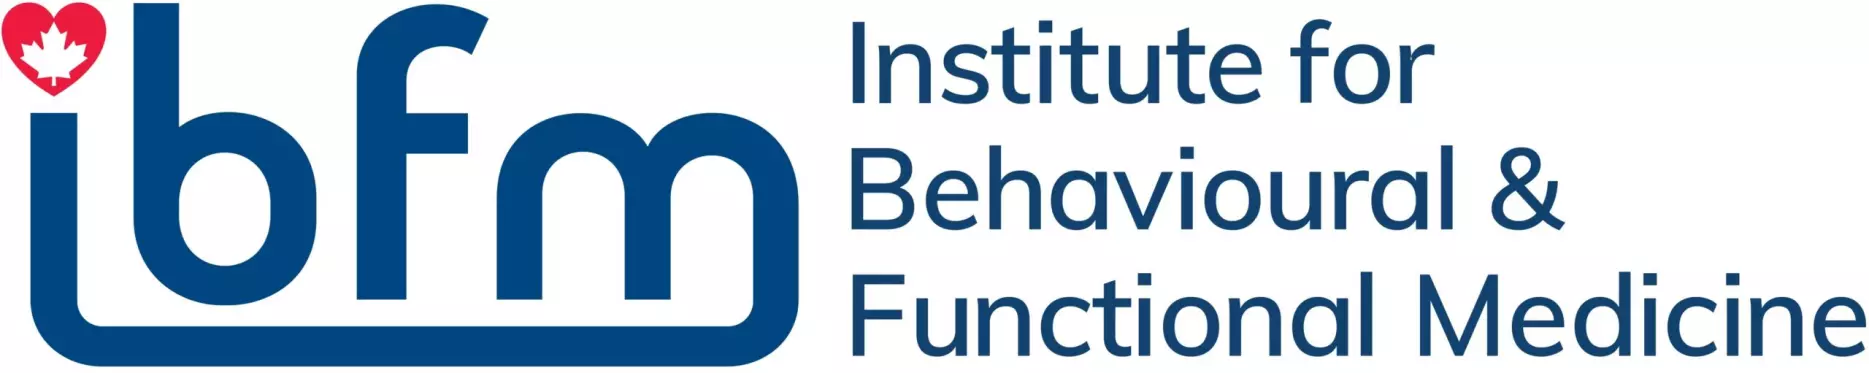 ibfm logo, natural treatments for sleep, headache, fatigue, lower back pain, post-concussion syndrome, hypertension, blood pressure, homepage, ibfm, Institute for Behavioural & Functional Medicine, ontario, canada